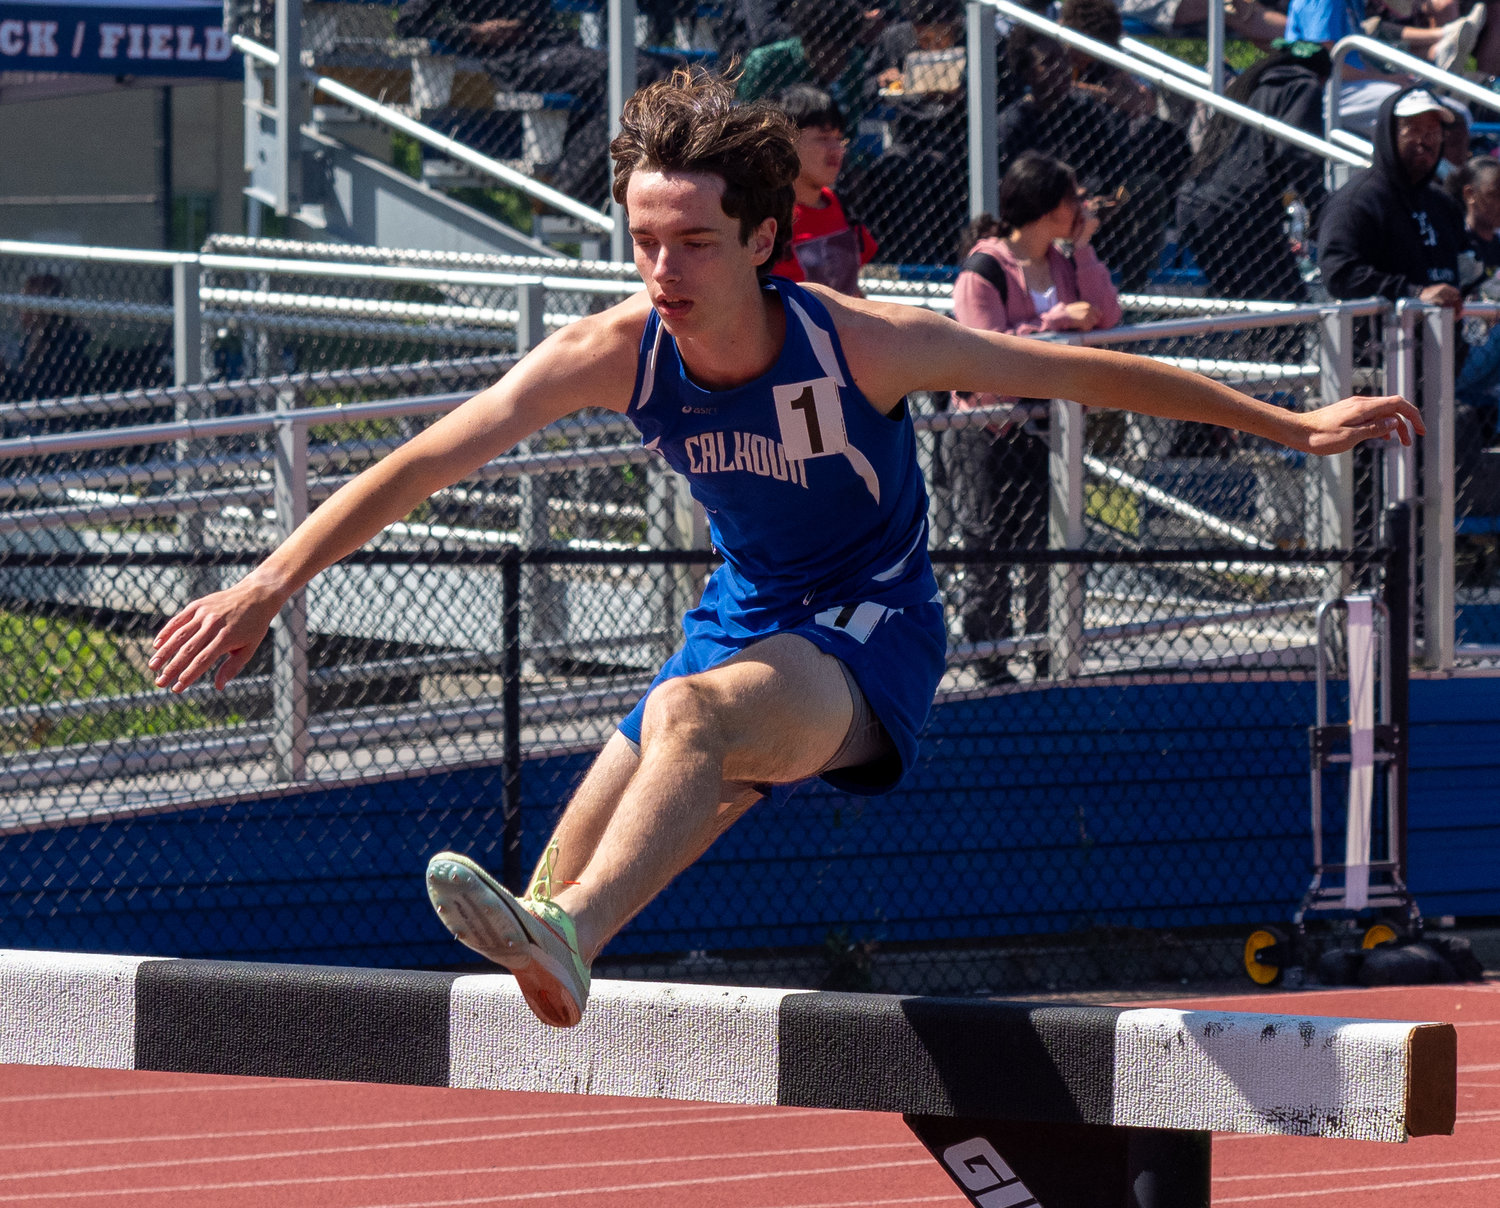 Calhoun sophomore Logan Schaeffler won the Nassau Class AA title and placed fourth in the state in the 3000m steeplechase.